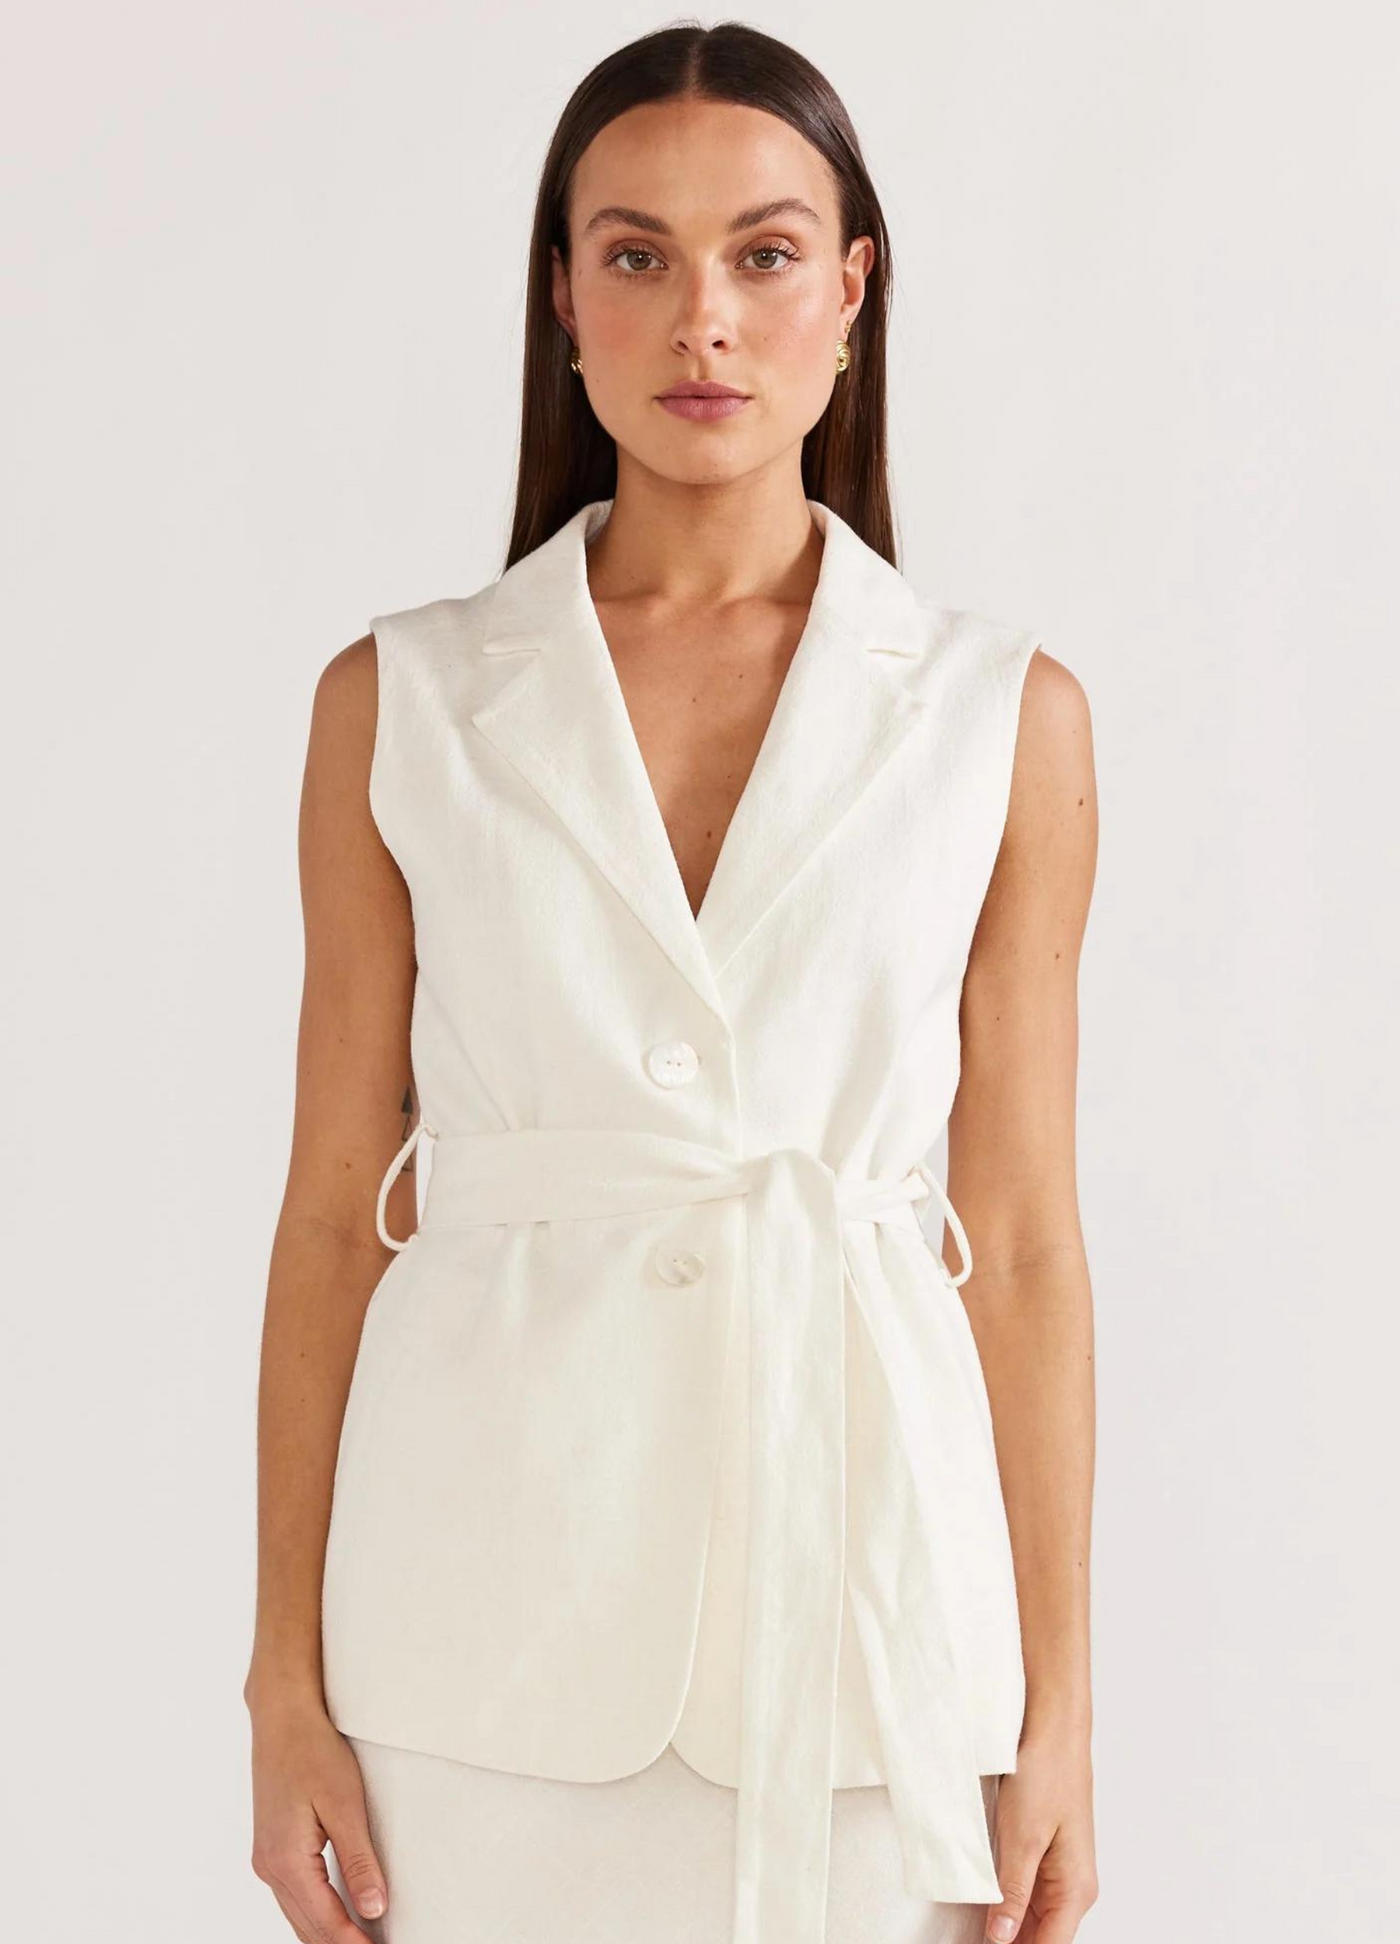 Sleeveless button up white blazer from Staple the Label